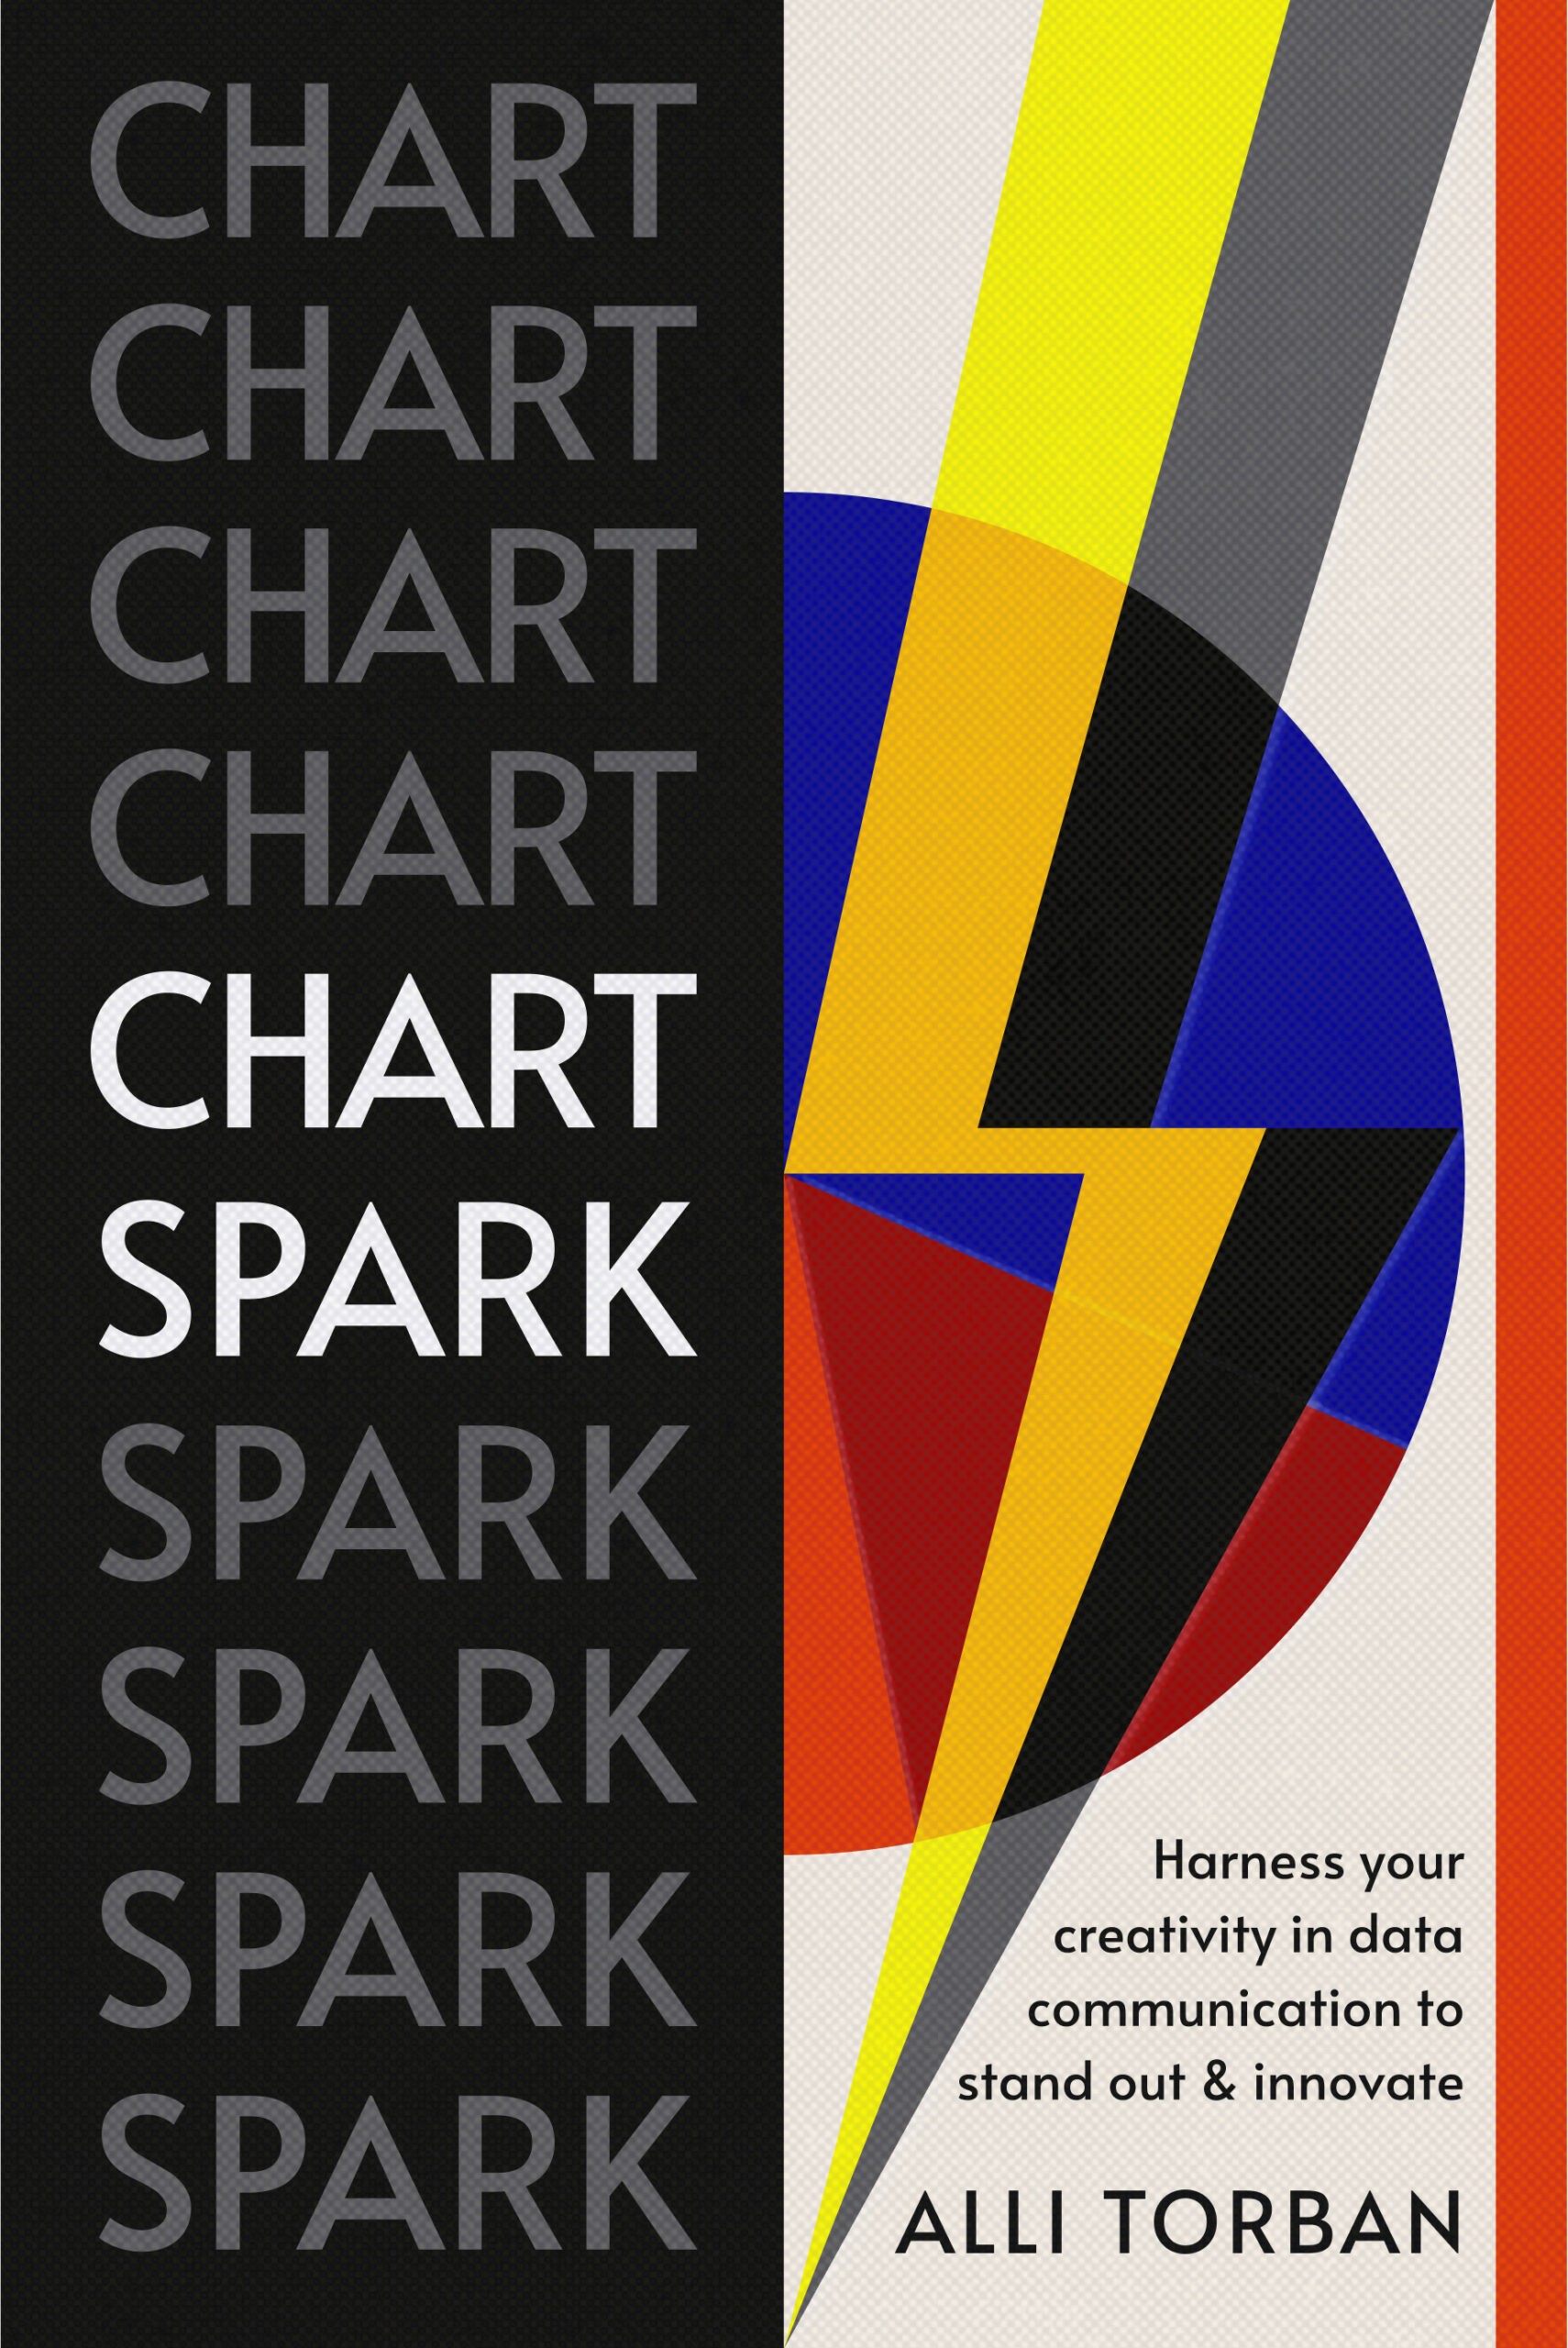 Cover of Chart Spark with a lightning bolt, representing the power and energy of data visualization.